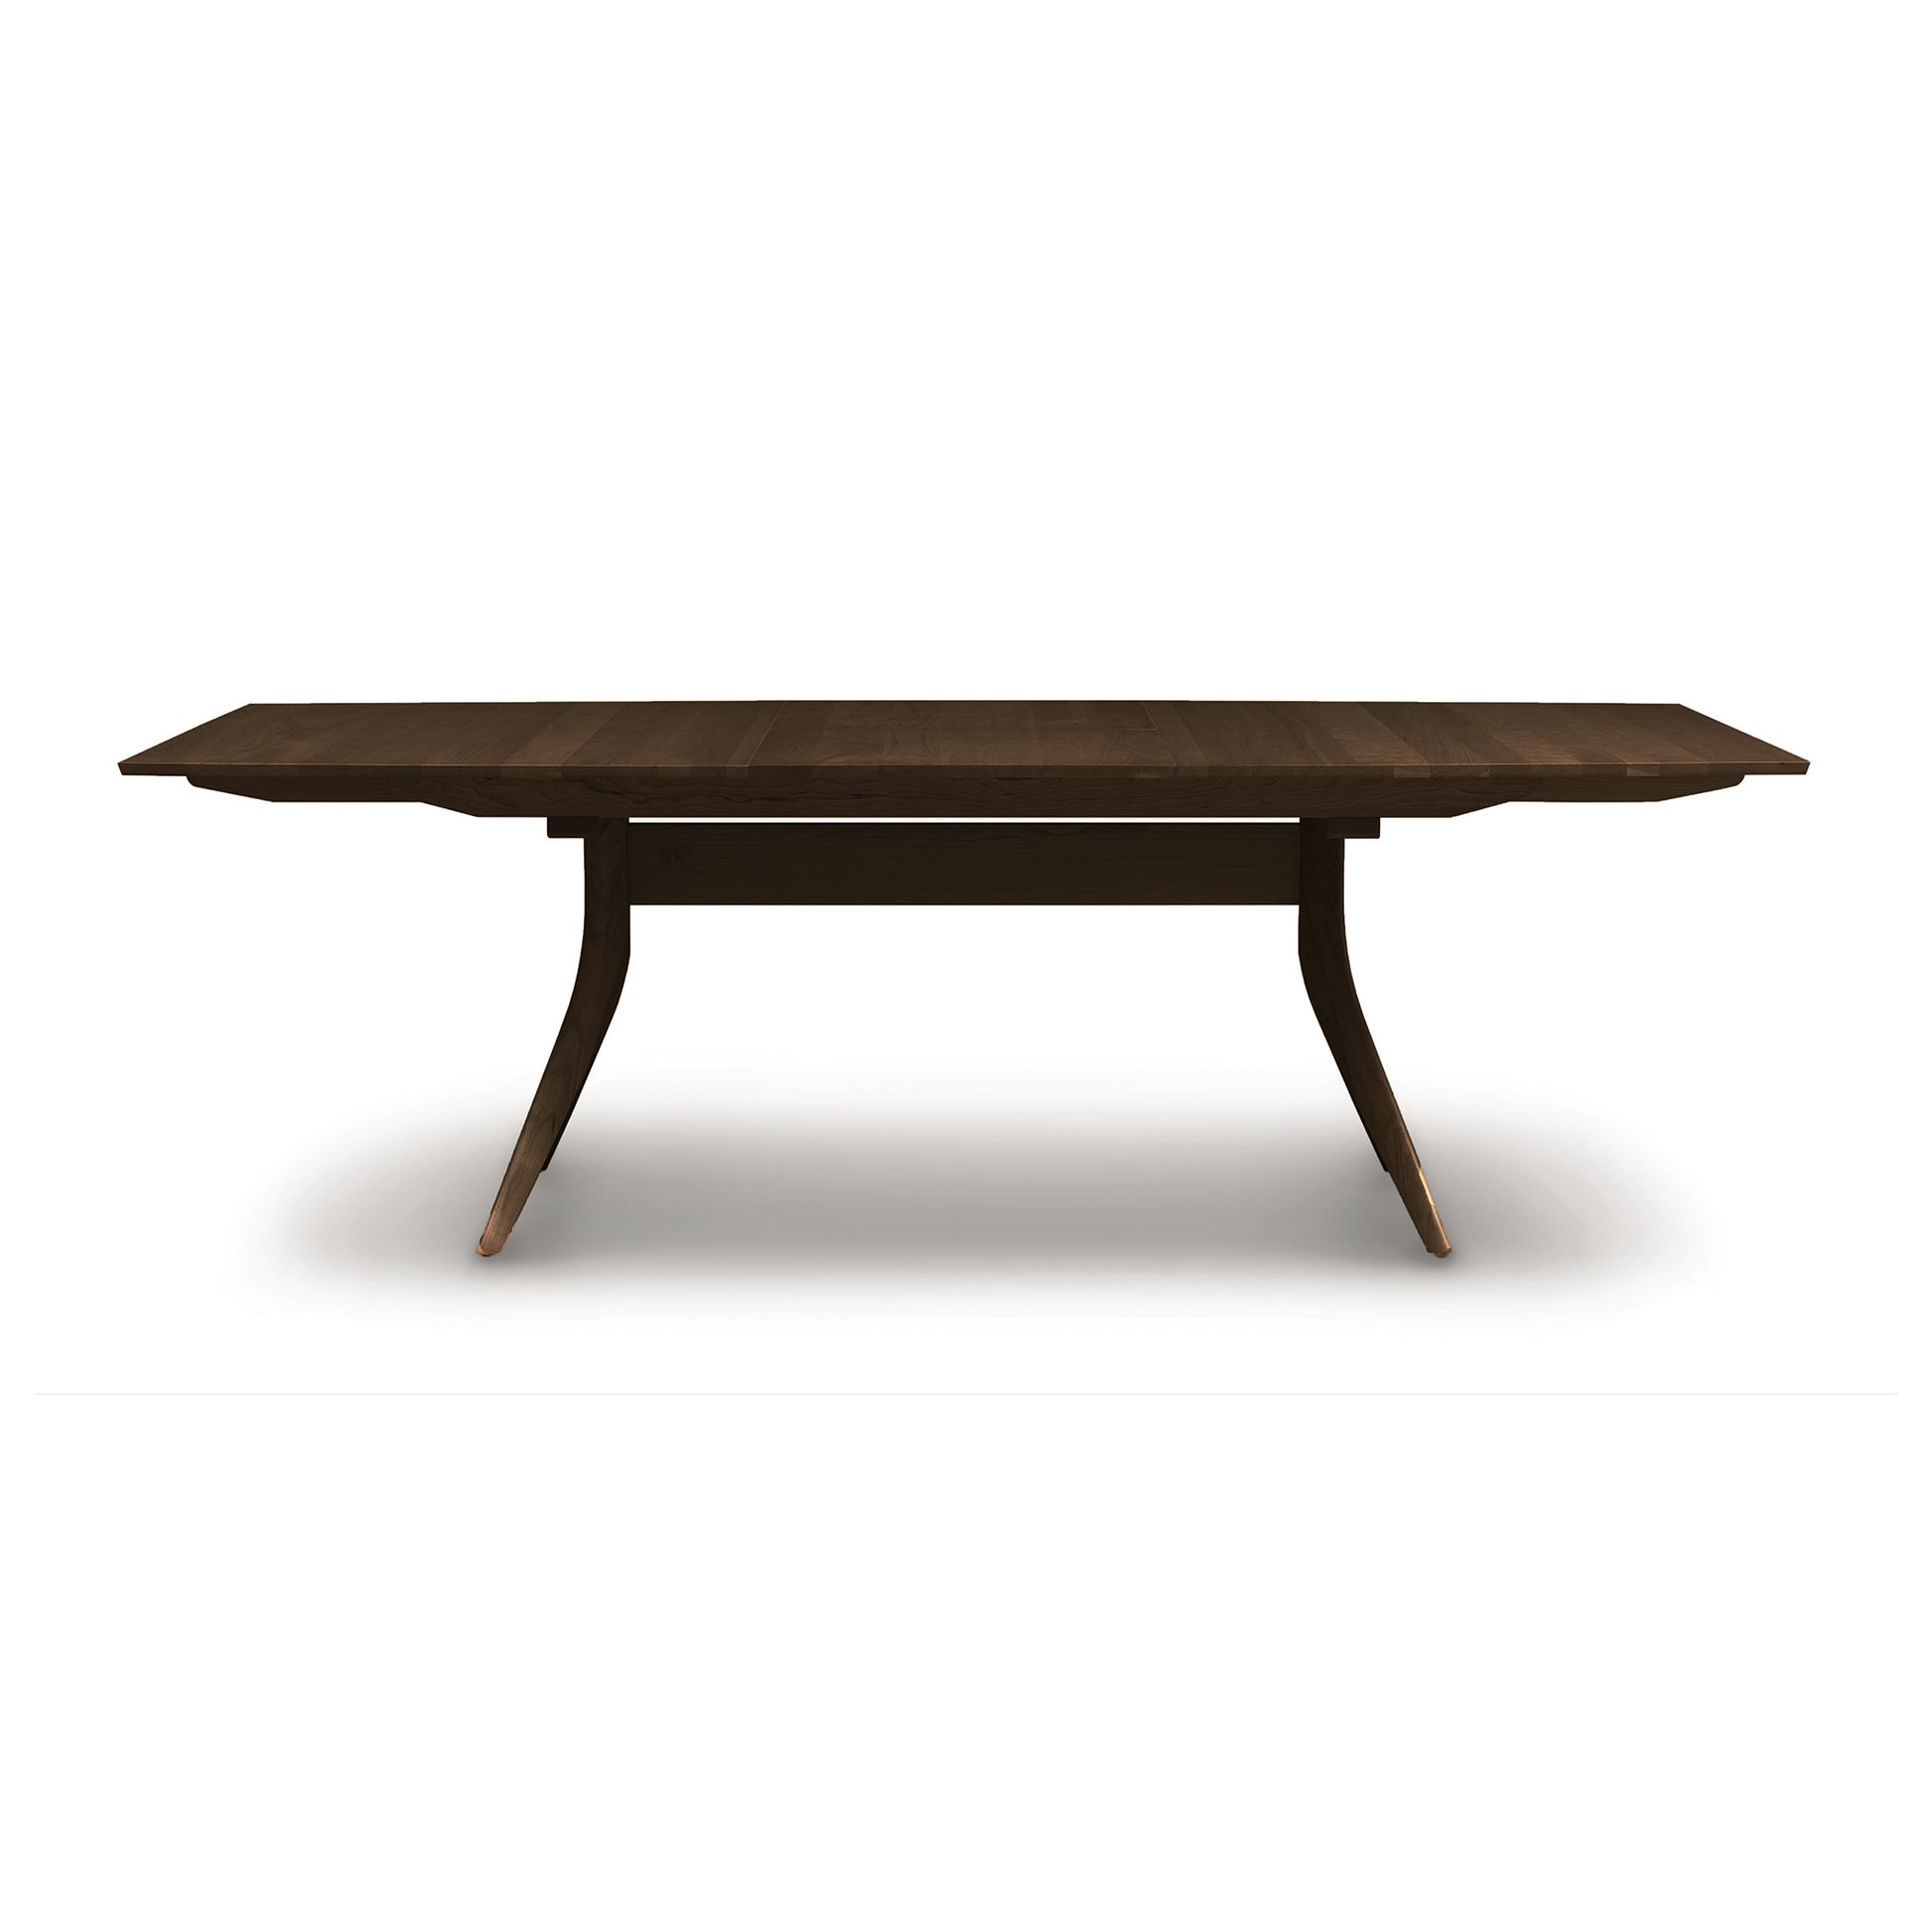 A solid American hardwood dining table with a dark finish and an extended leaf, featuring tapered legs and a smooth tabletop, isolated on a white background - the Catalina Trestle Extension Table by Copeland Furniture.